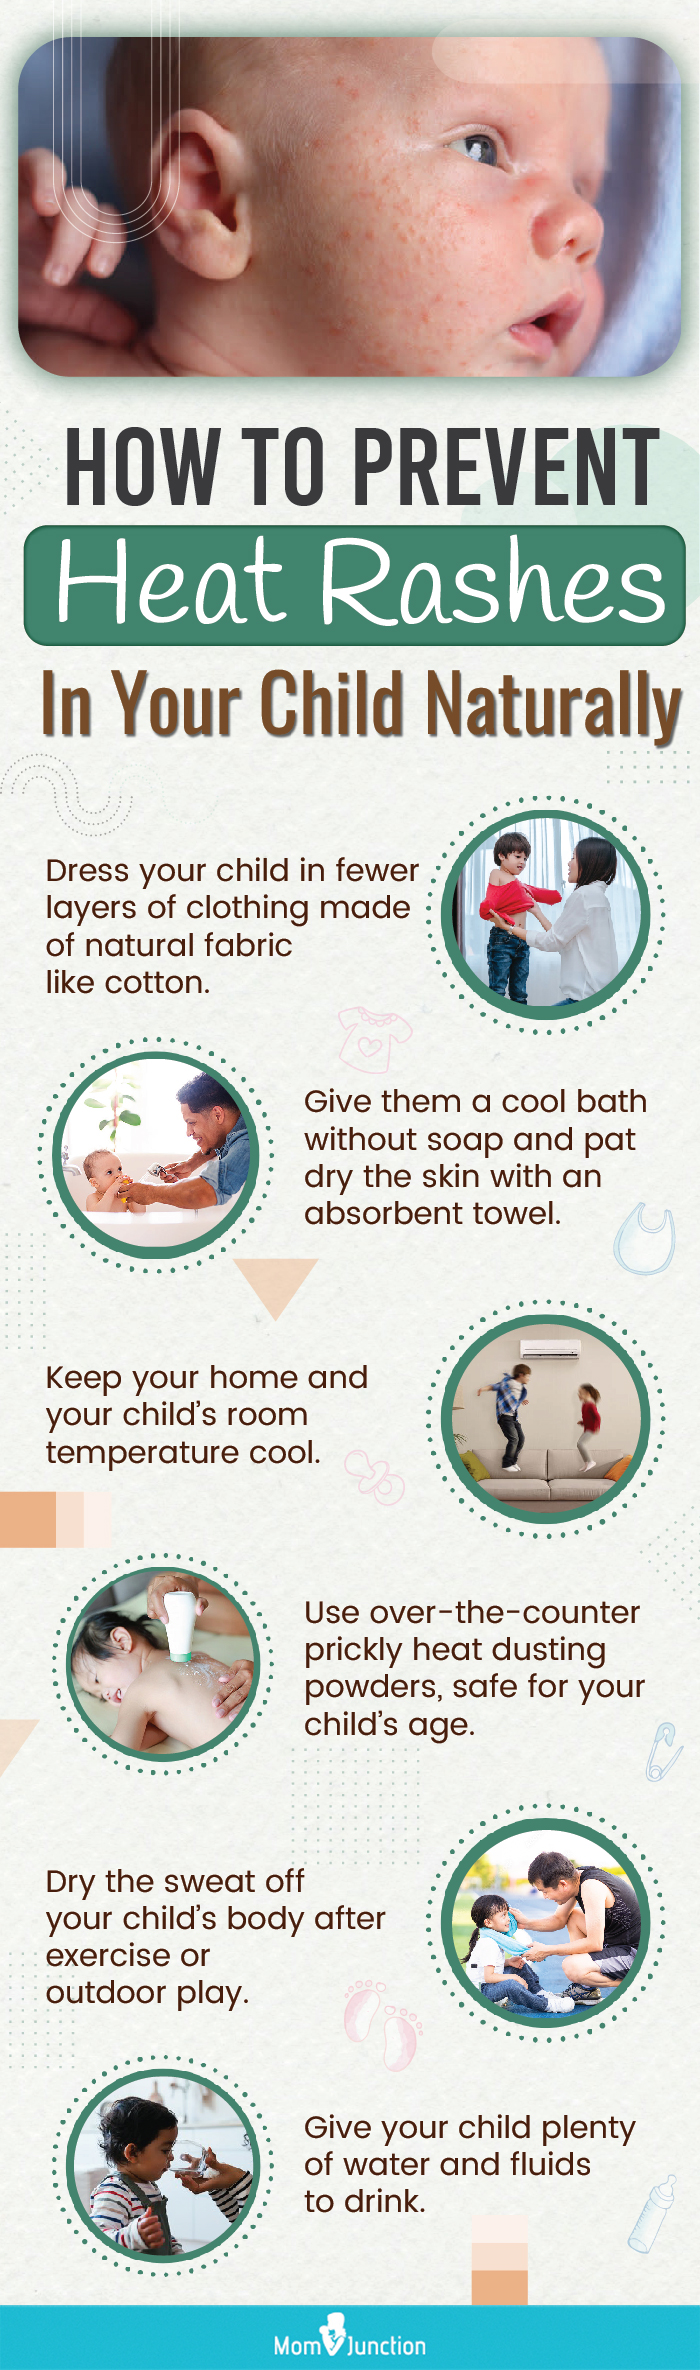 ways to manage and prevent heat rashes in children (infographic)